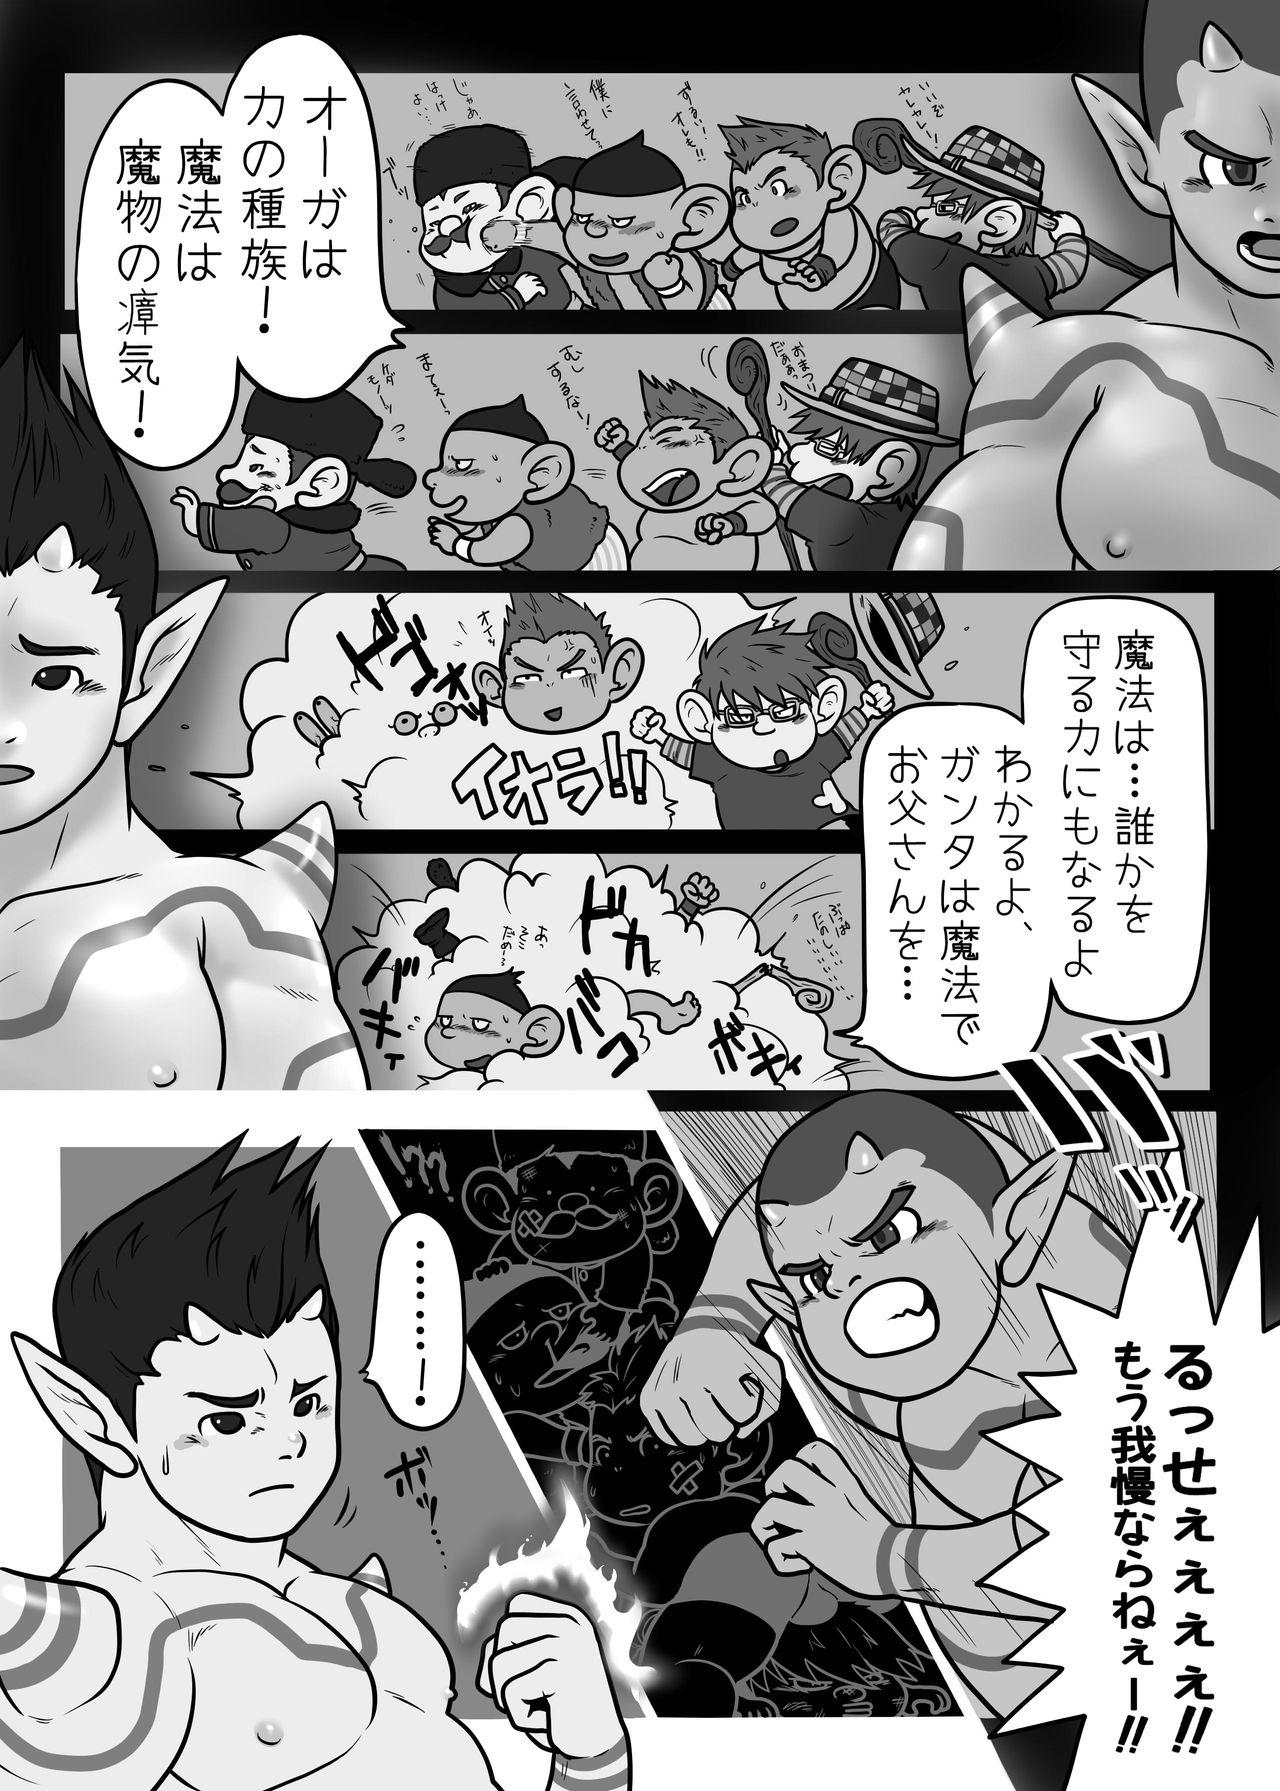 Smalltits Ogre to Dwa +Prologue & Epilogue - Dragon quest x Gay Twinks - Page 4